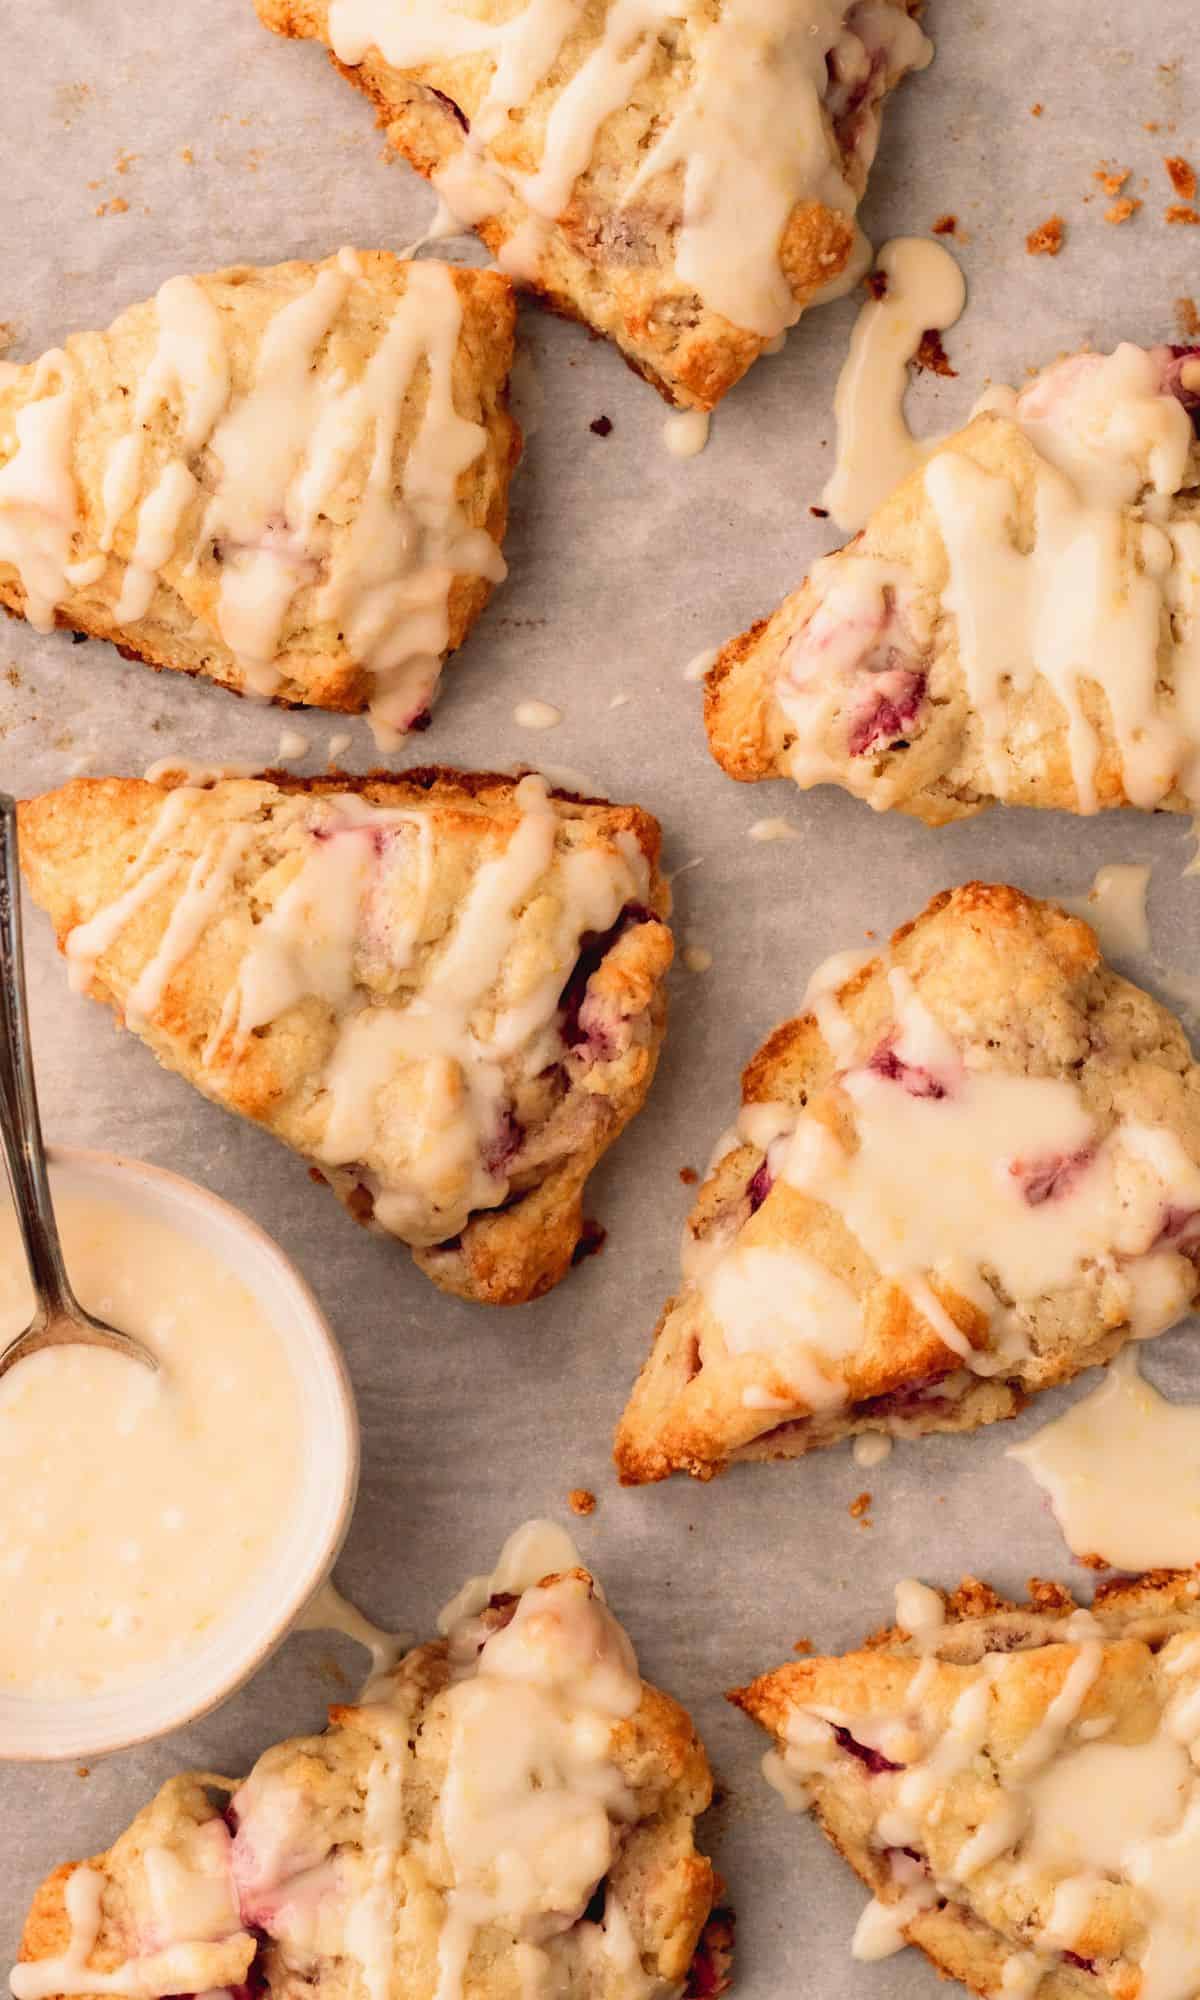 Several strawberry scones with lemon zest on a baking sheet.